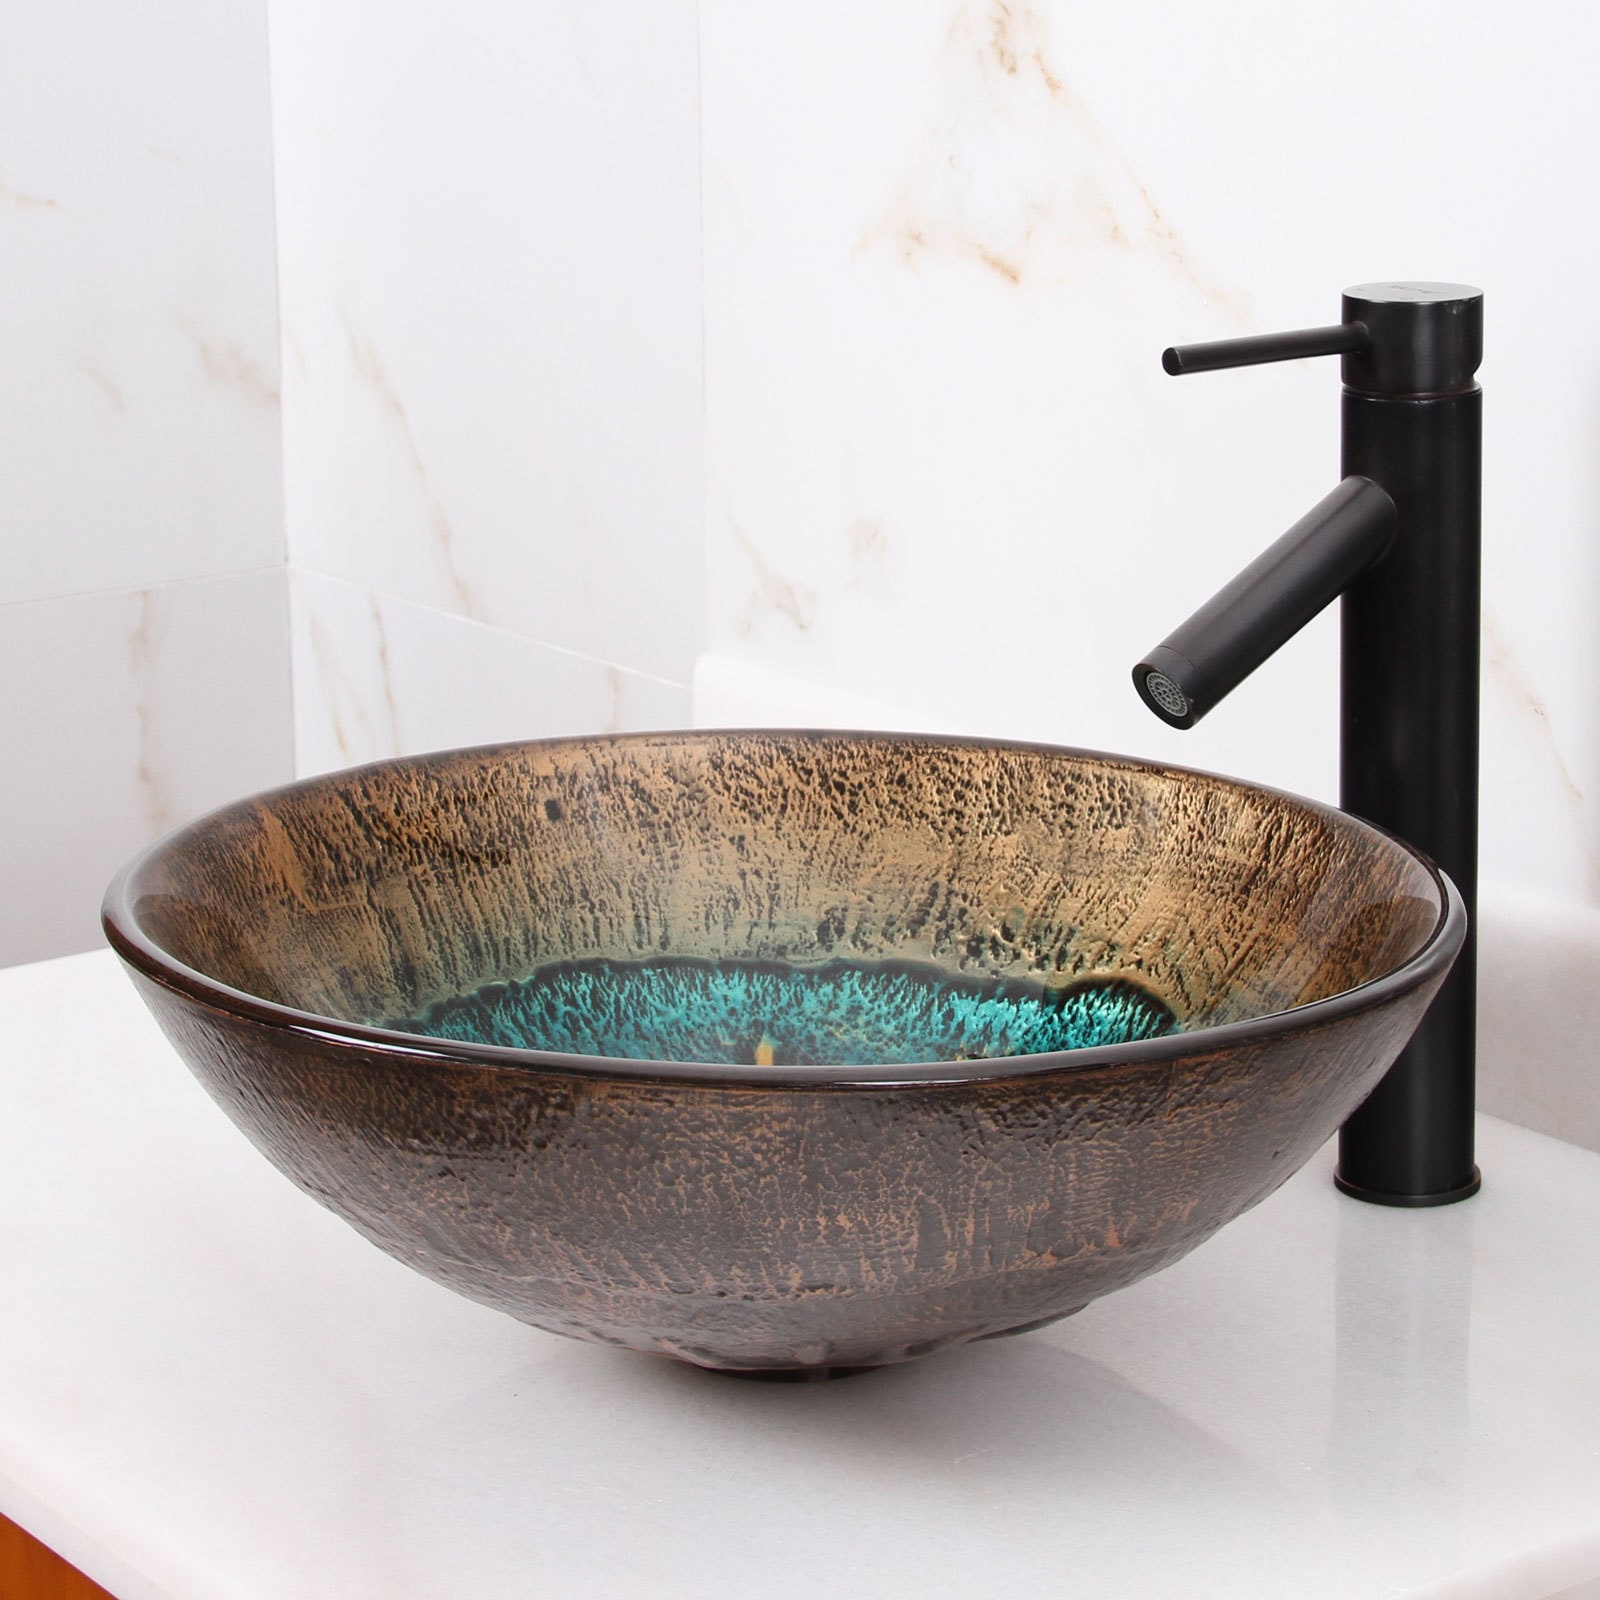 Bathroom Round Pattern Vessel Sink Tempered Ceramic Basin Bowl Faucet Combo 